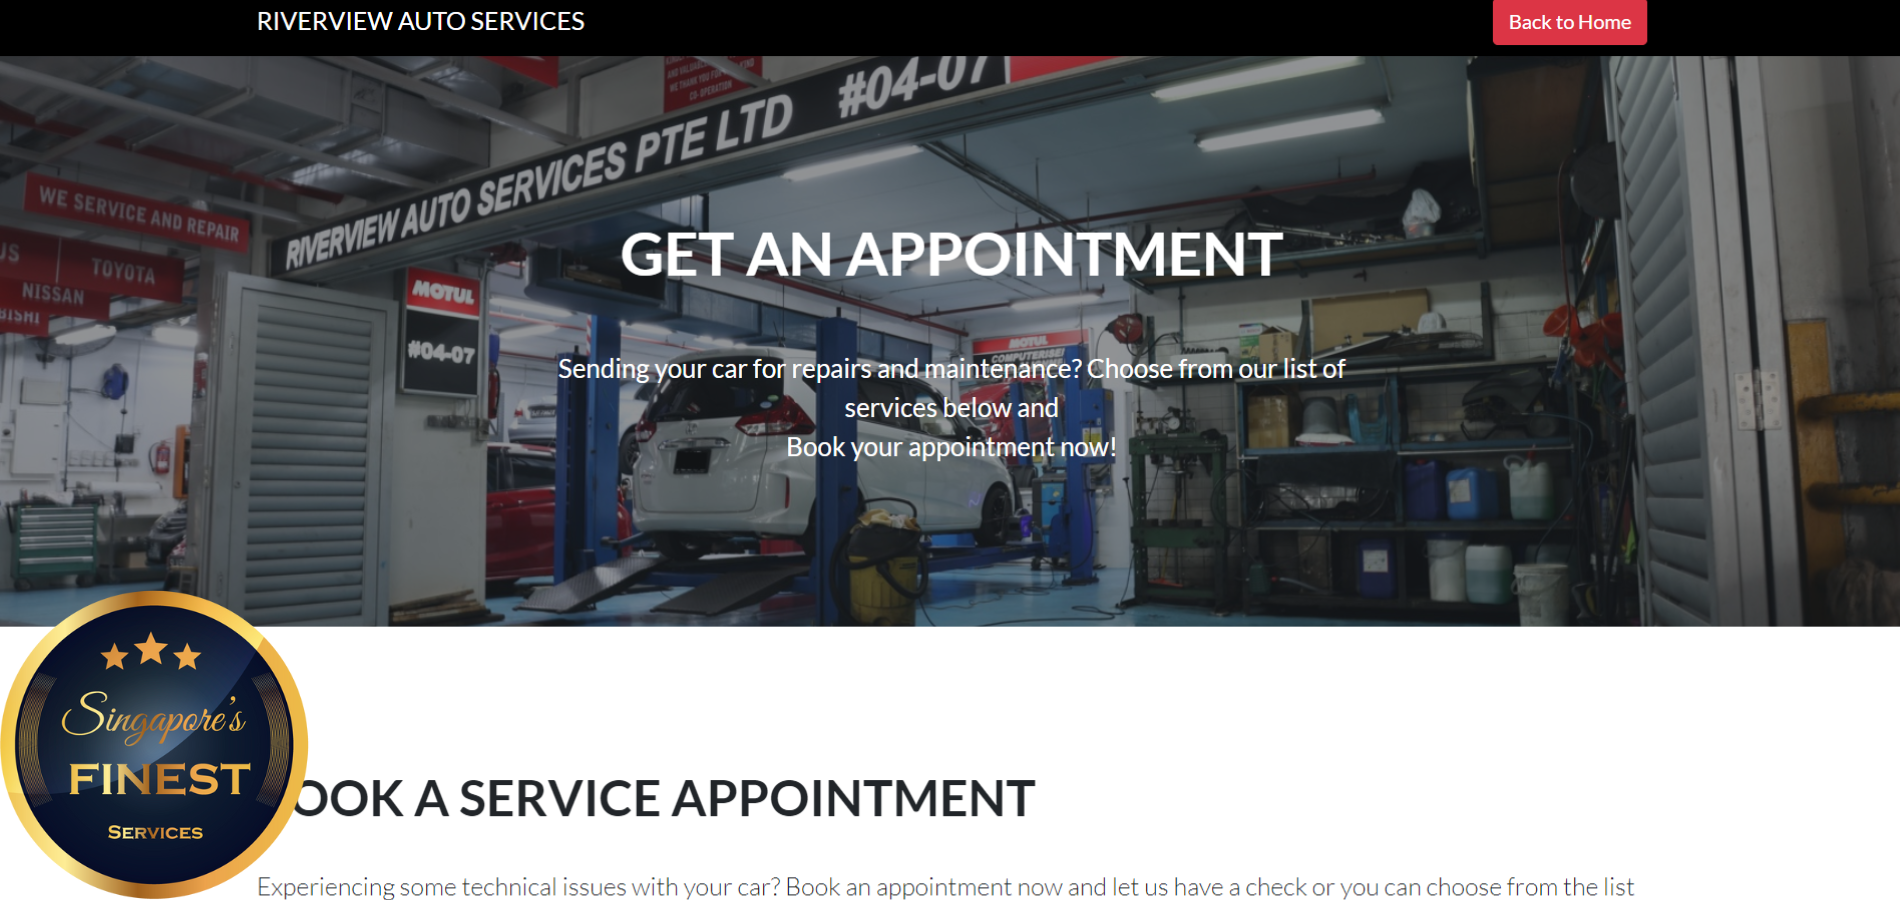 The Finest Car Servicing Center in Singapore